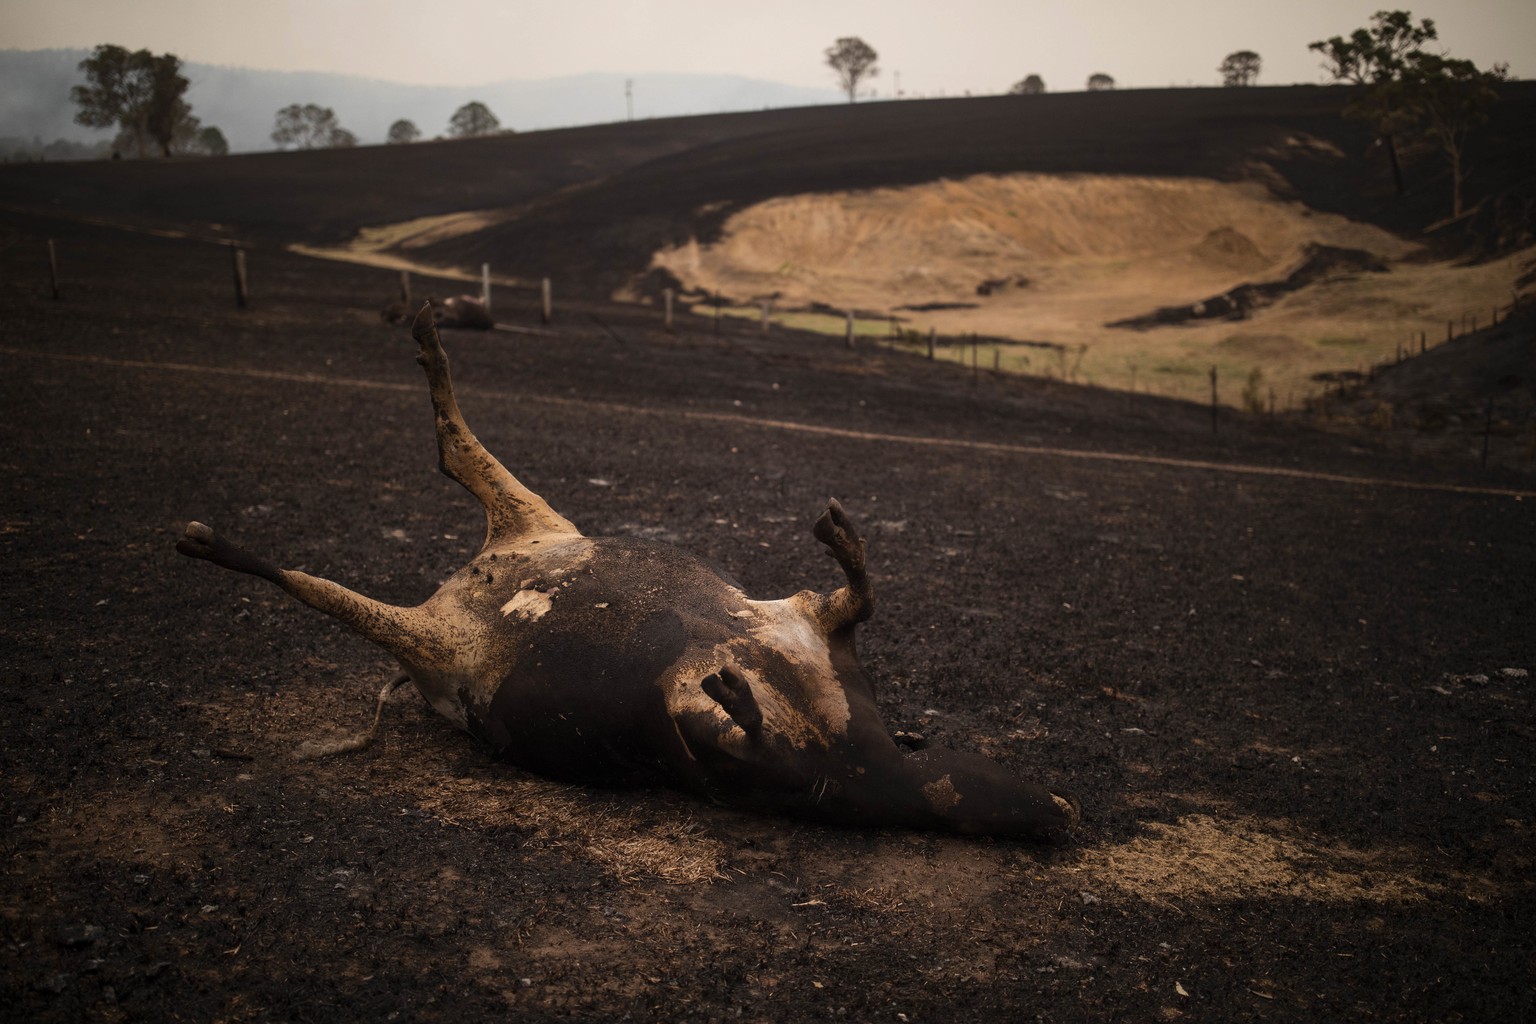 epa08097345 The carcass of a cow killed in a bushfire lays in a field in Coolagolite, New South Wales, Australia, 01 January 2020. EPA/SEAN DAVEY AUSTRALIA AND NEW ZEALAND OUT